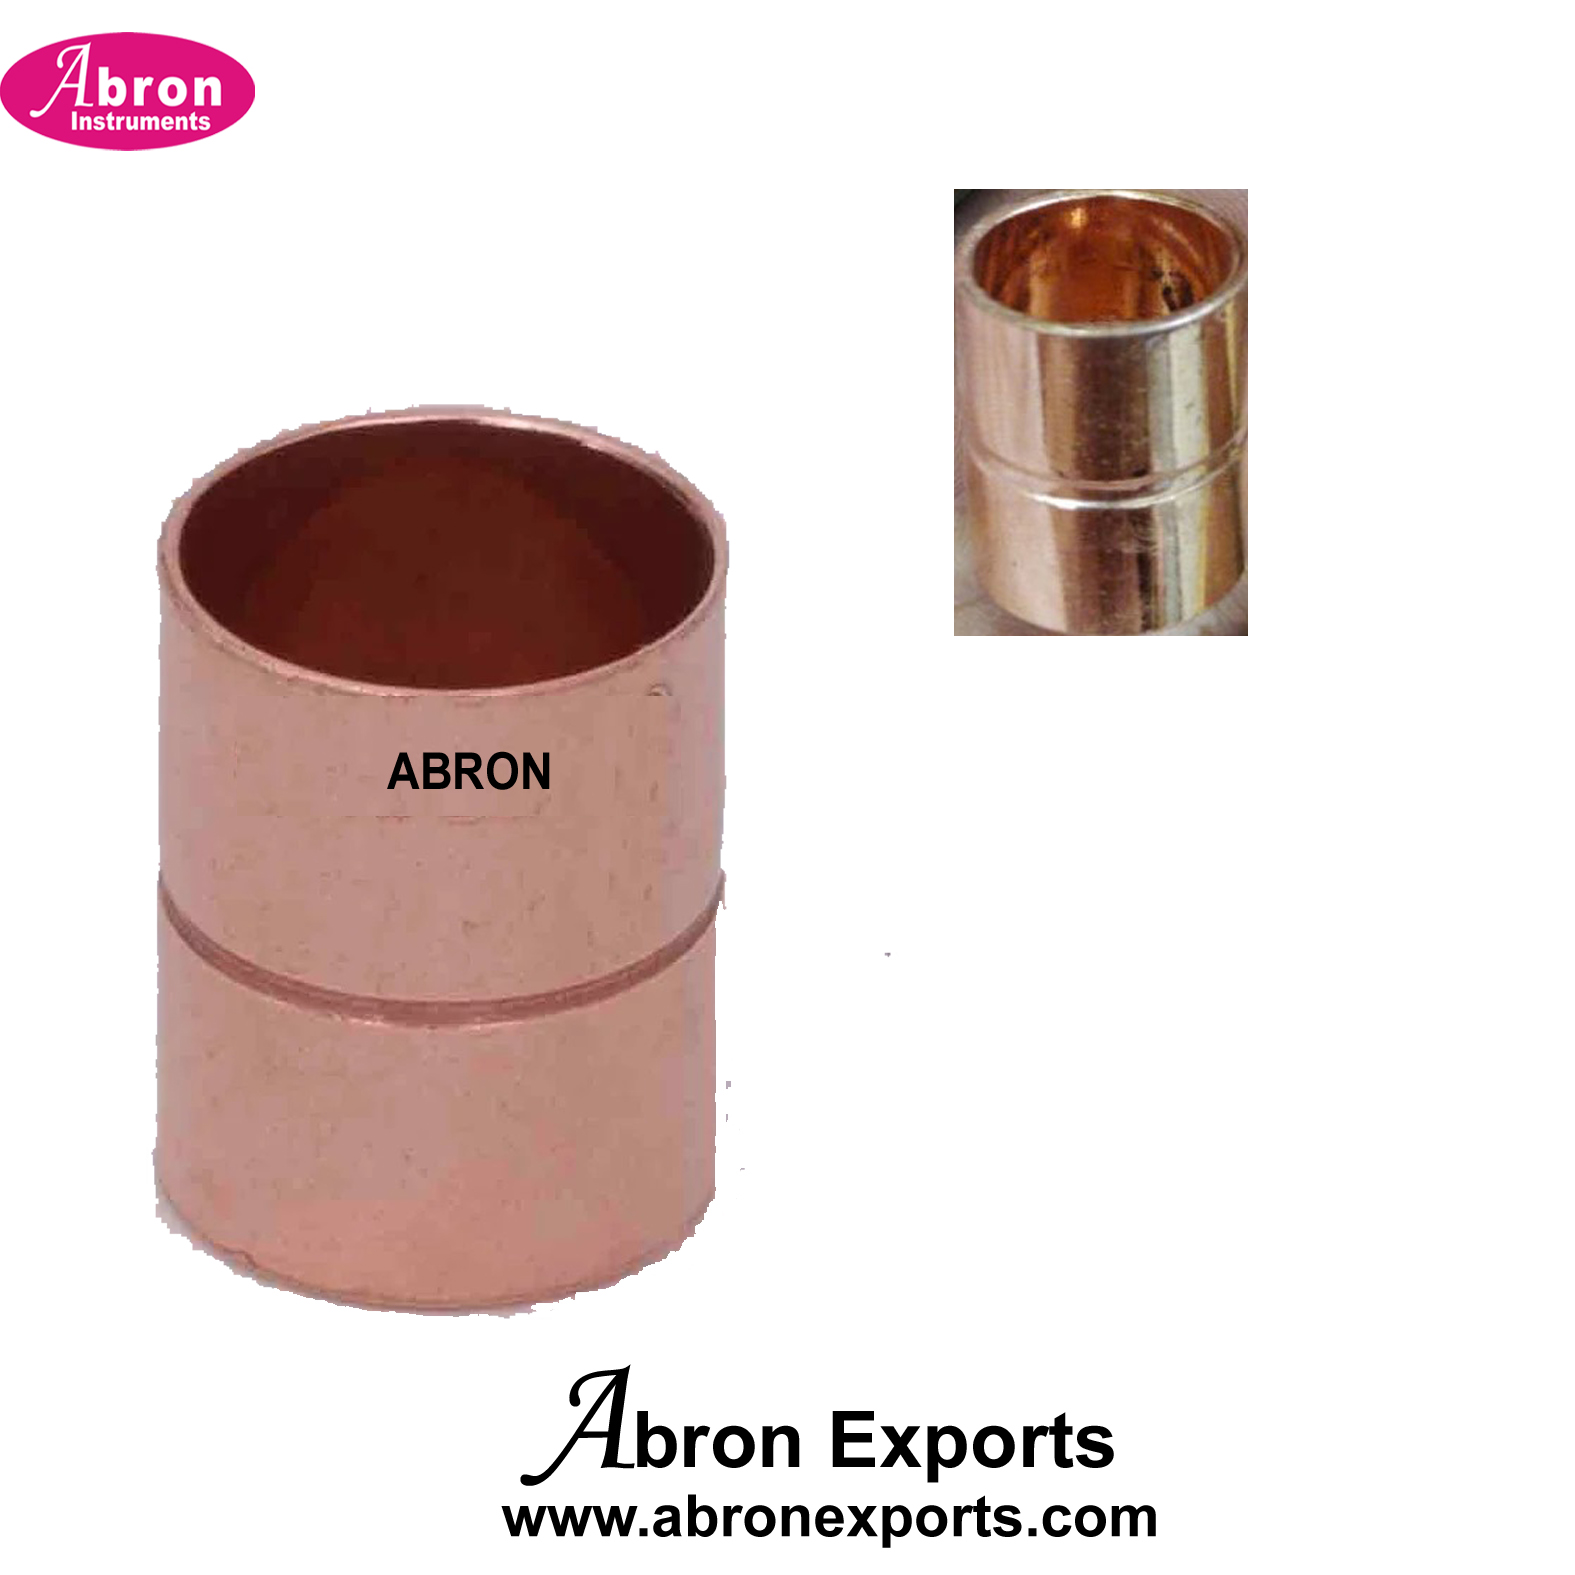 Medical gas Pipe Line spare copper coupler 15mm or 22mm Pack of 100 each gas for pipeline installation Abron ABM-1121PC22 